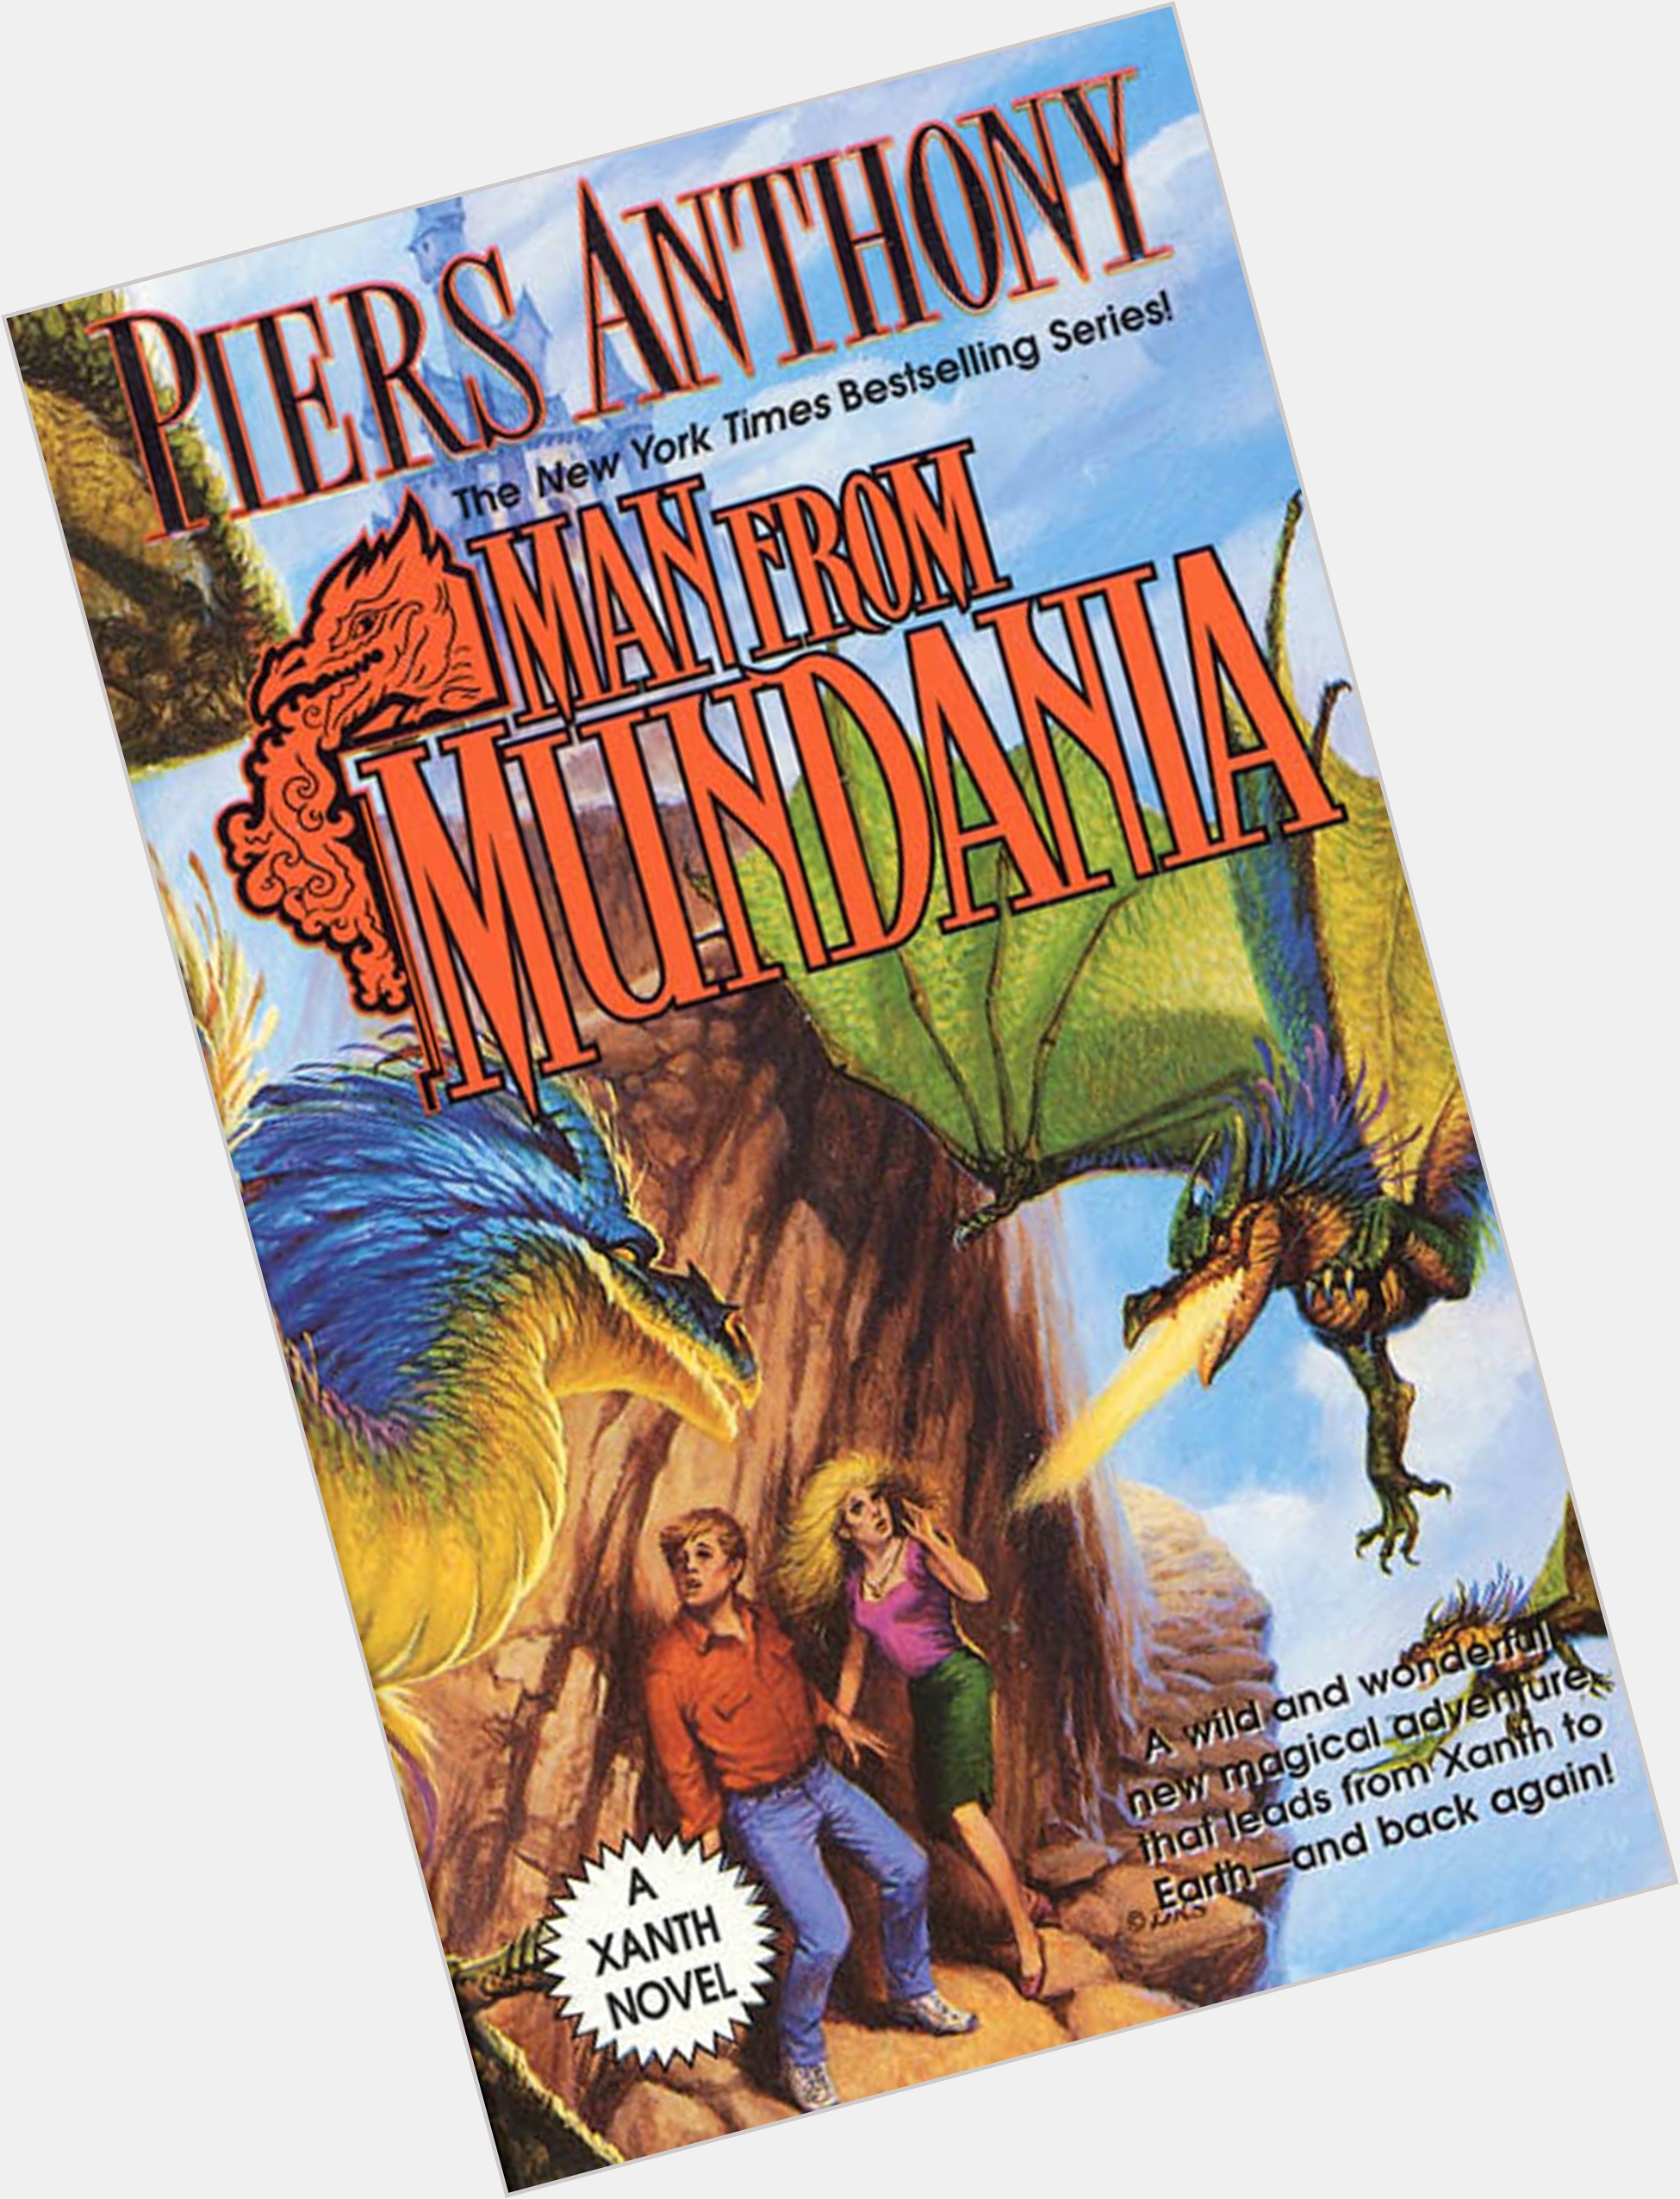 Https://fanpagepress.net/m/P/Piers Anthony Dating 2